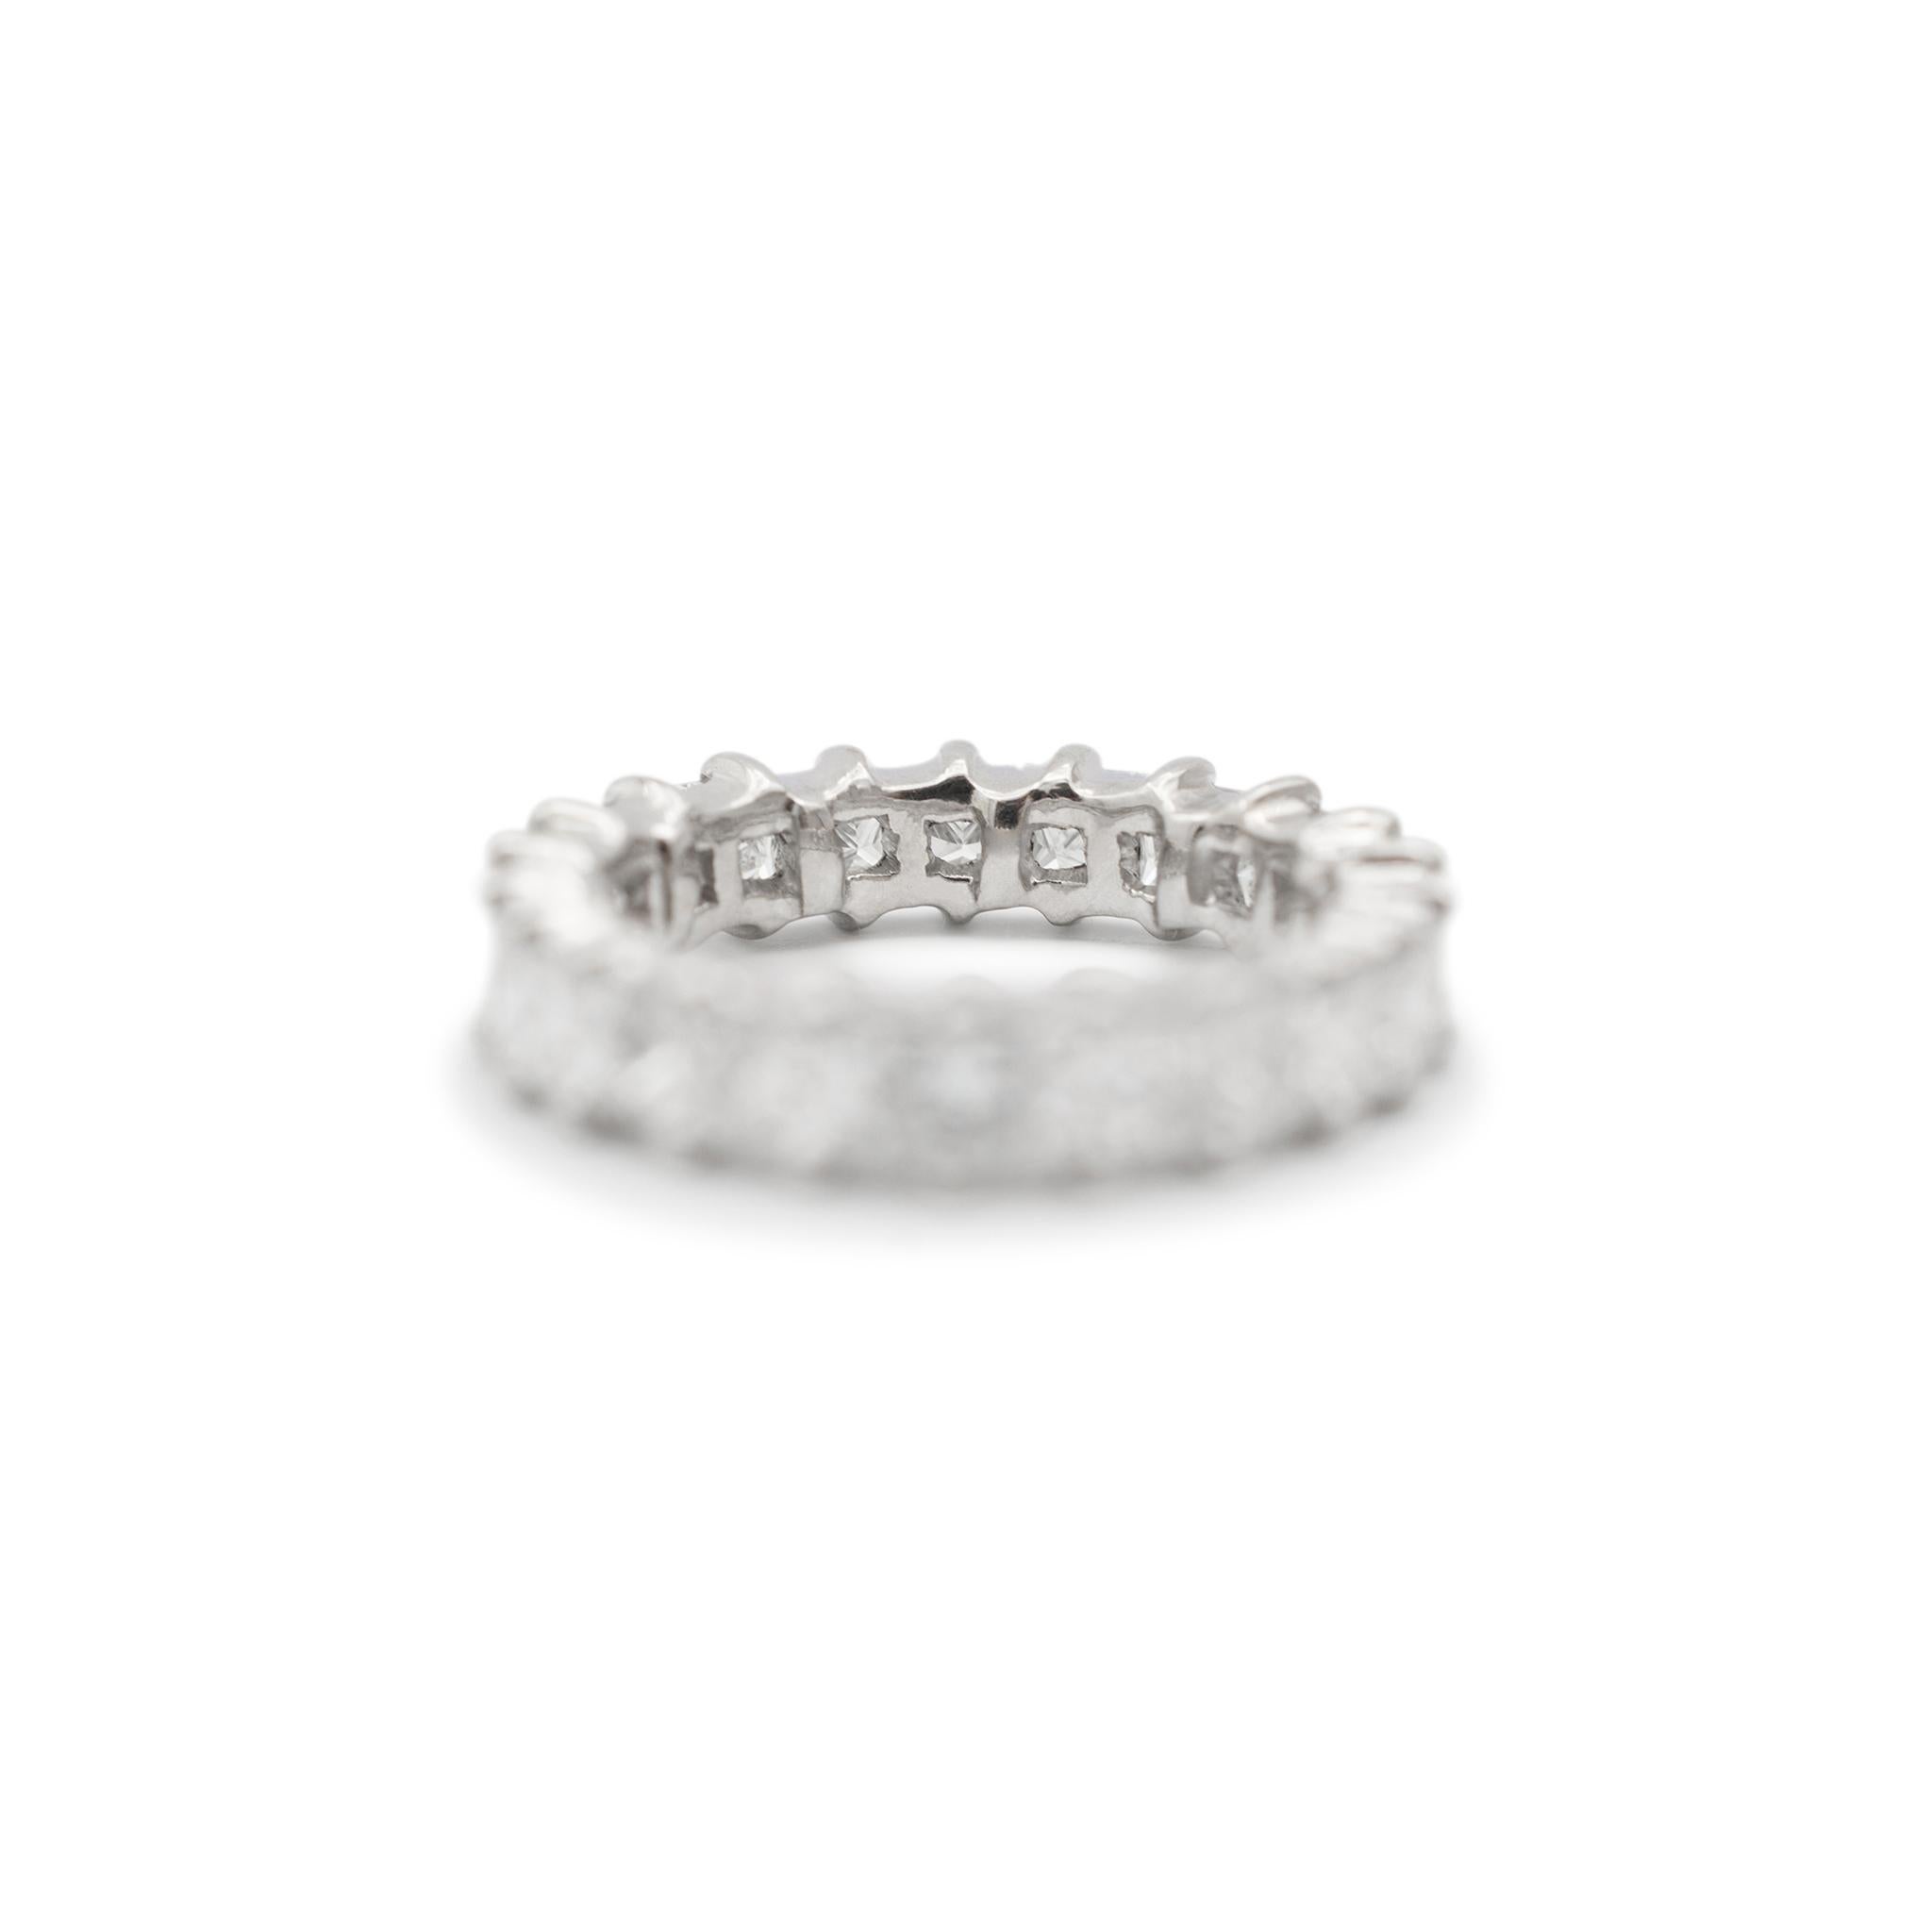 Gender: Ladies

Metal Type: 18K White Gold 

Total Weight: 5.17 grams

Ring Size: 5

Width: 4.50 mm

18K white gold diamond eternity wedding band with a soft-square shank. The metal was tested and determined to be 18K white gold. In excellent